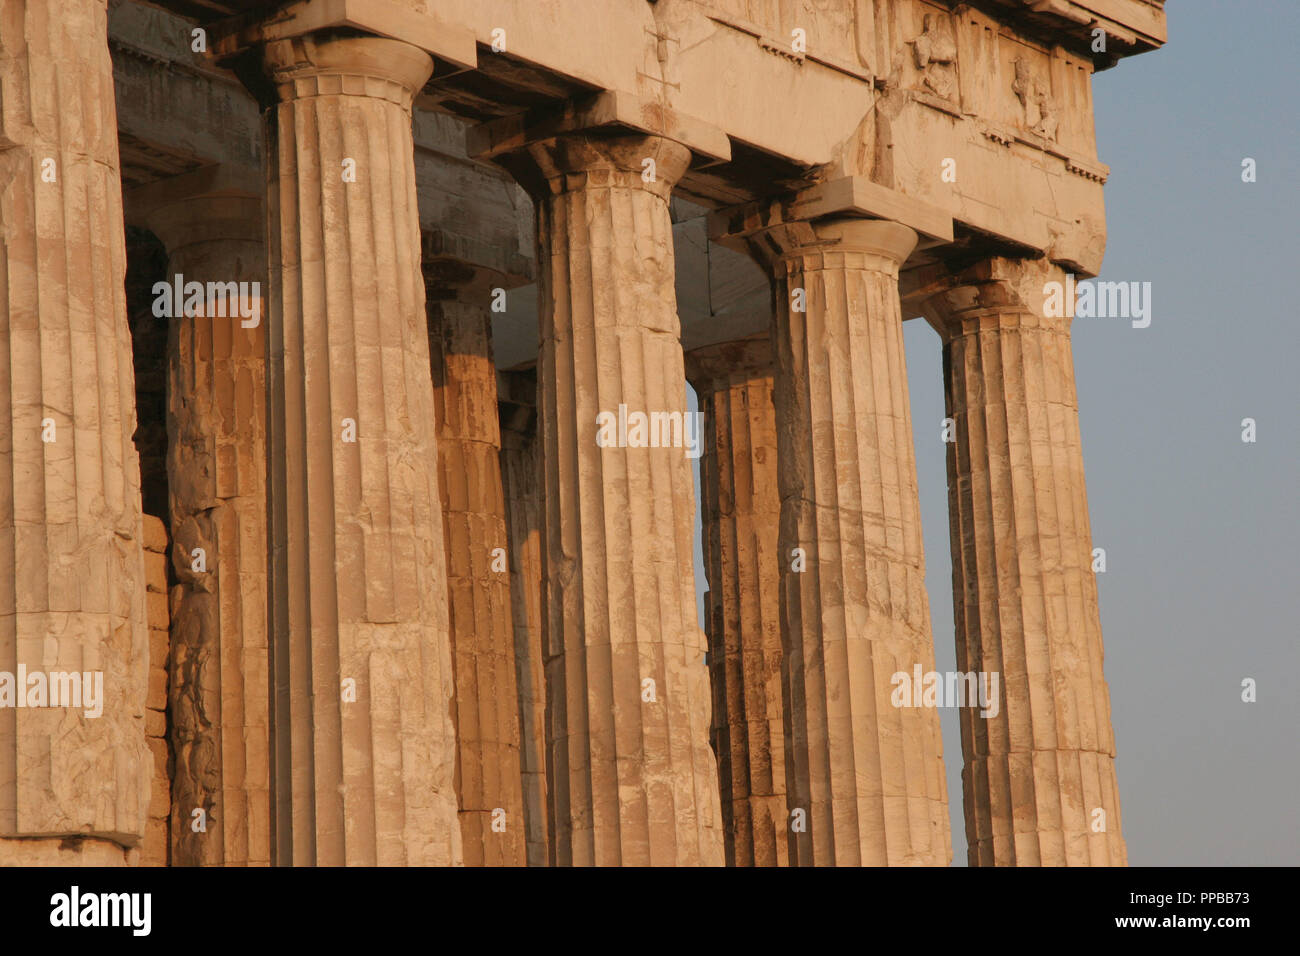 Greek Art. Parthenon. Was built between 447-438 BC. in Doric style under leadership of Pericles. The building was designed by the architects Ictinos and Callicrates. Detail of columns. Acropolis. Athens. Attica. Central Greek. Europe. Stock Photo